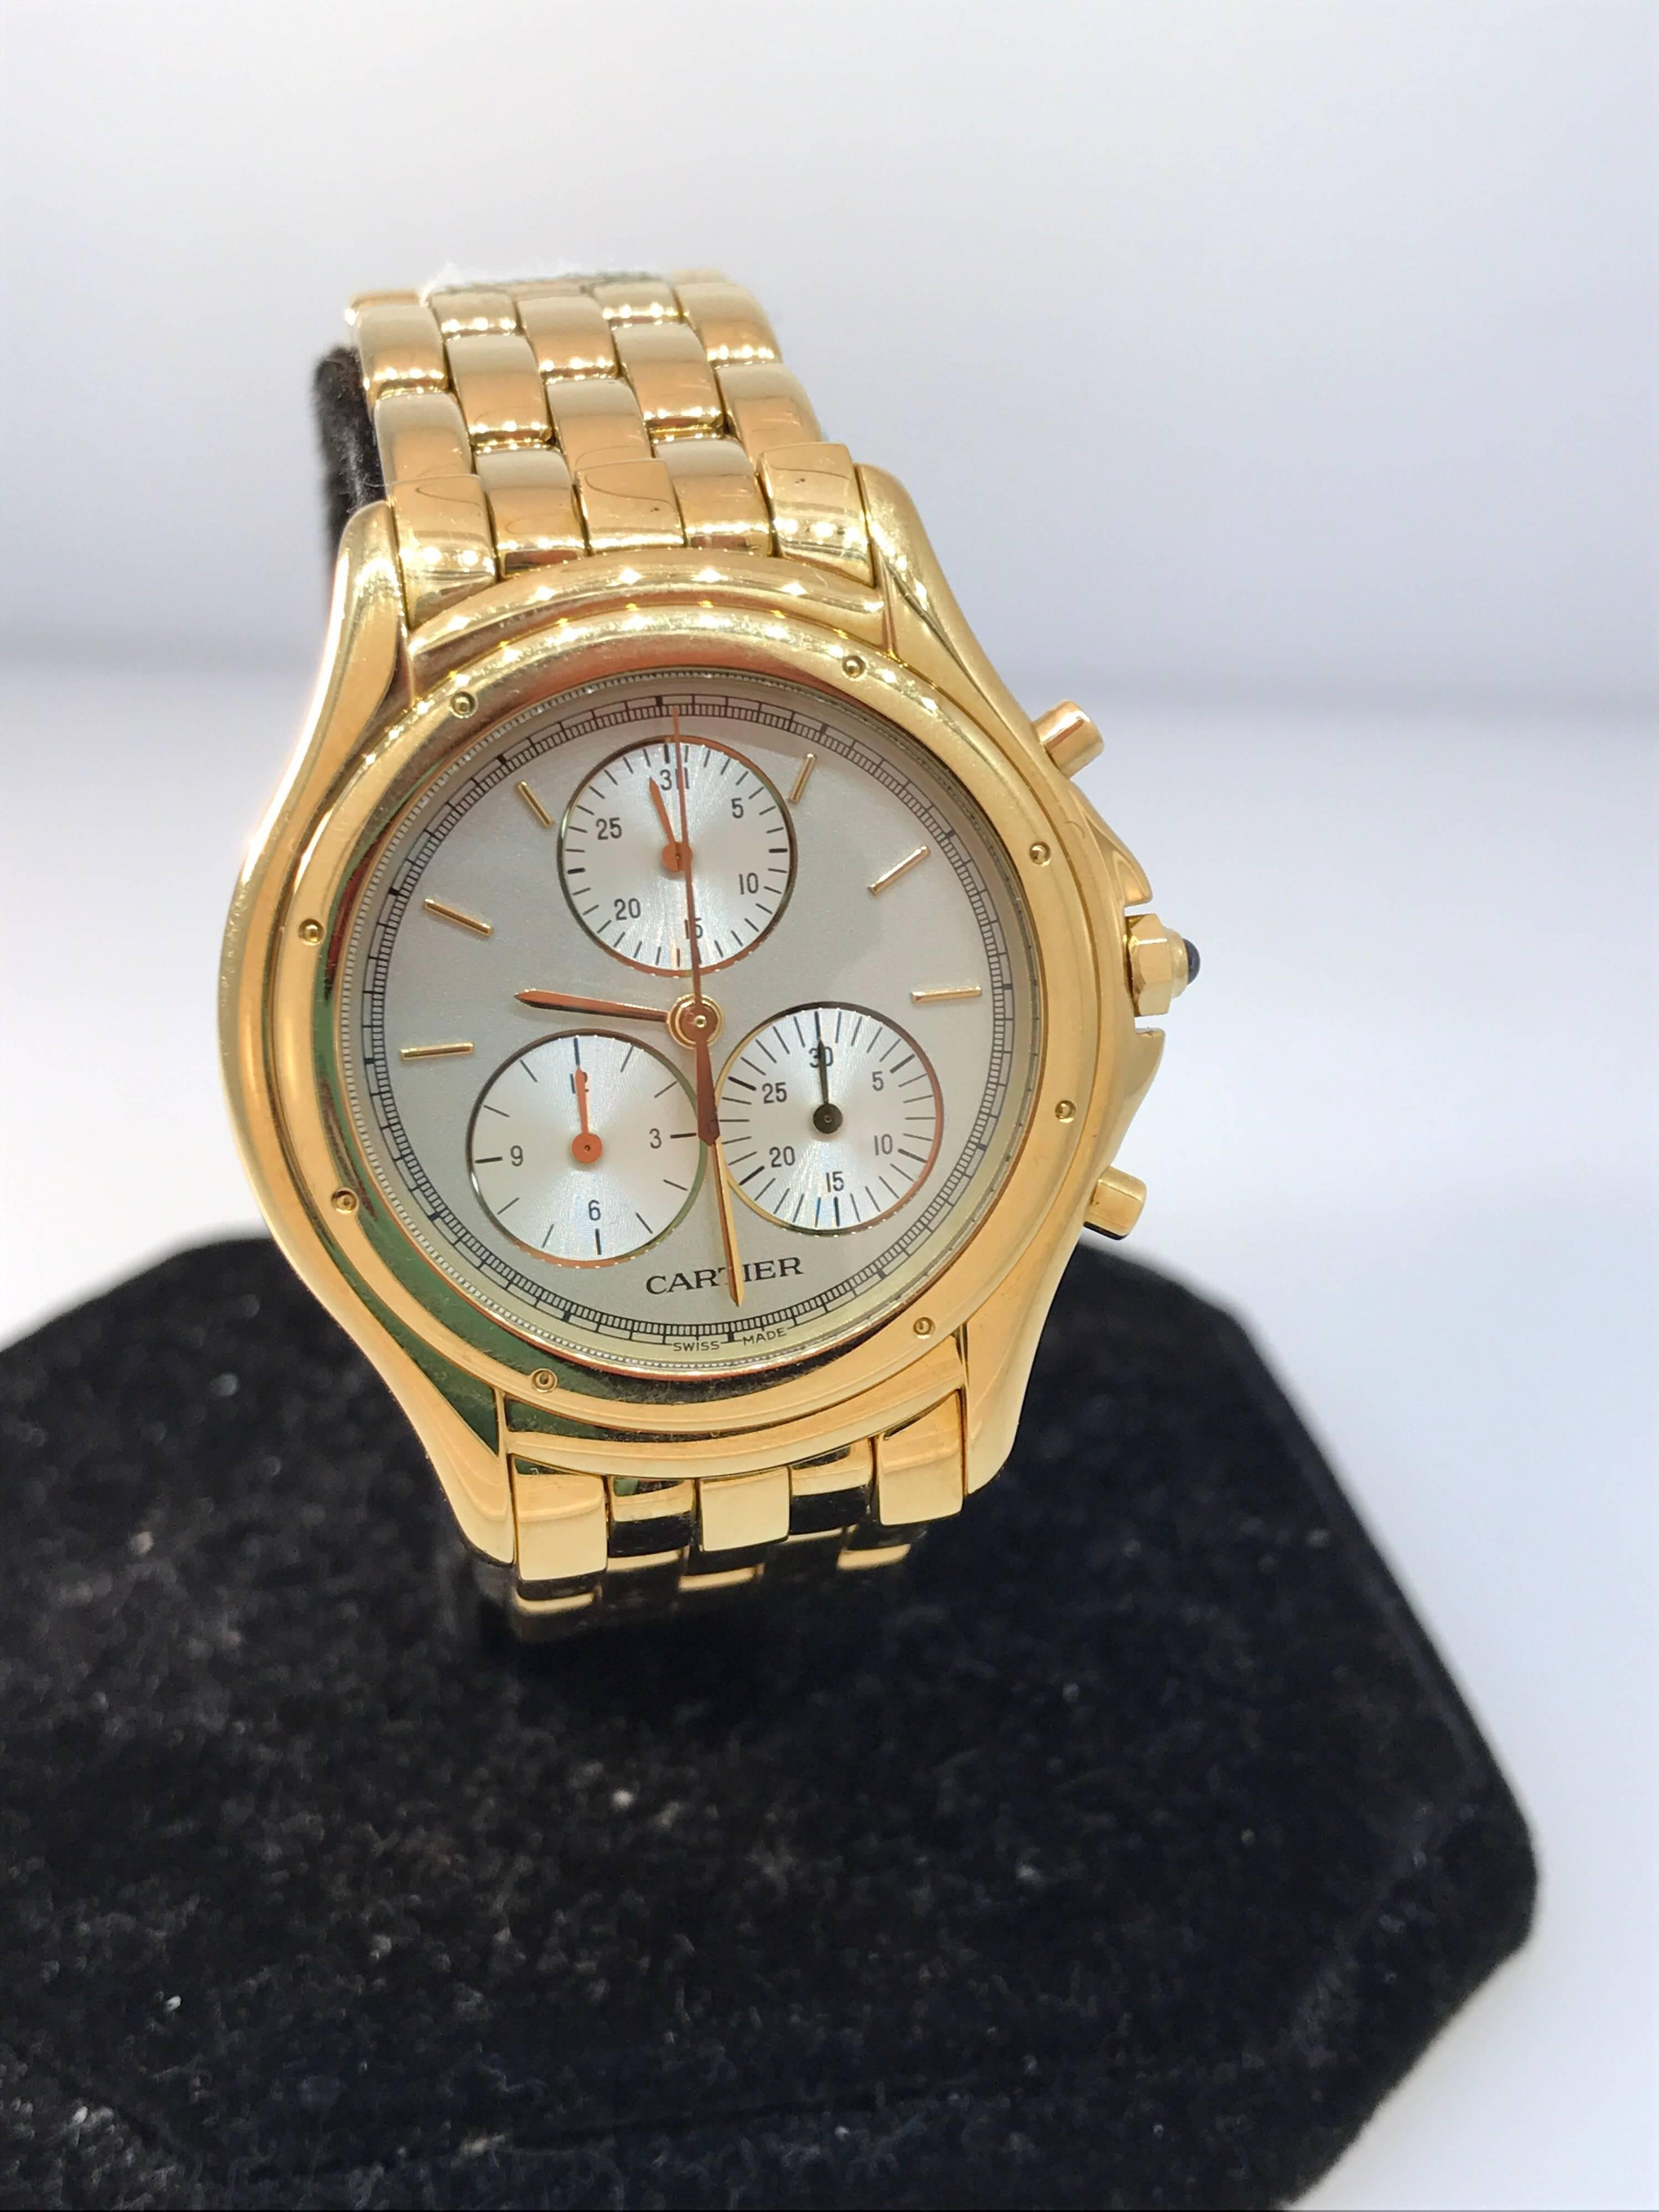 Cartier Cougar Men's Watch

Model Number: W35007B9

100% Authentic

Pre-owned (excellent condition. Light wear throughout.)

Comes with a generic watch box

18 Karat Yellow Gold Case & Bracelet

Silver Dial & Subdials

Fits up to 7.5 inch wrist